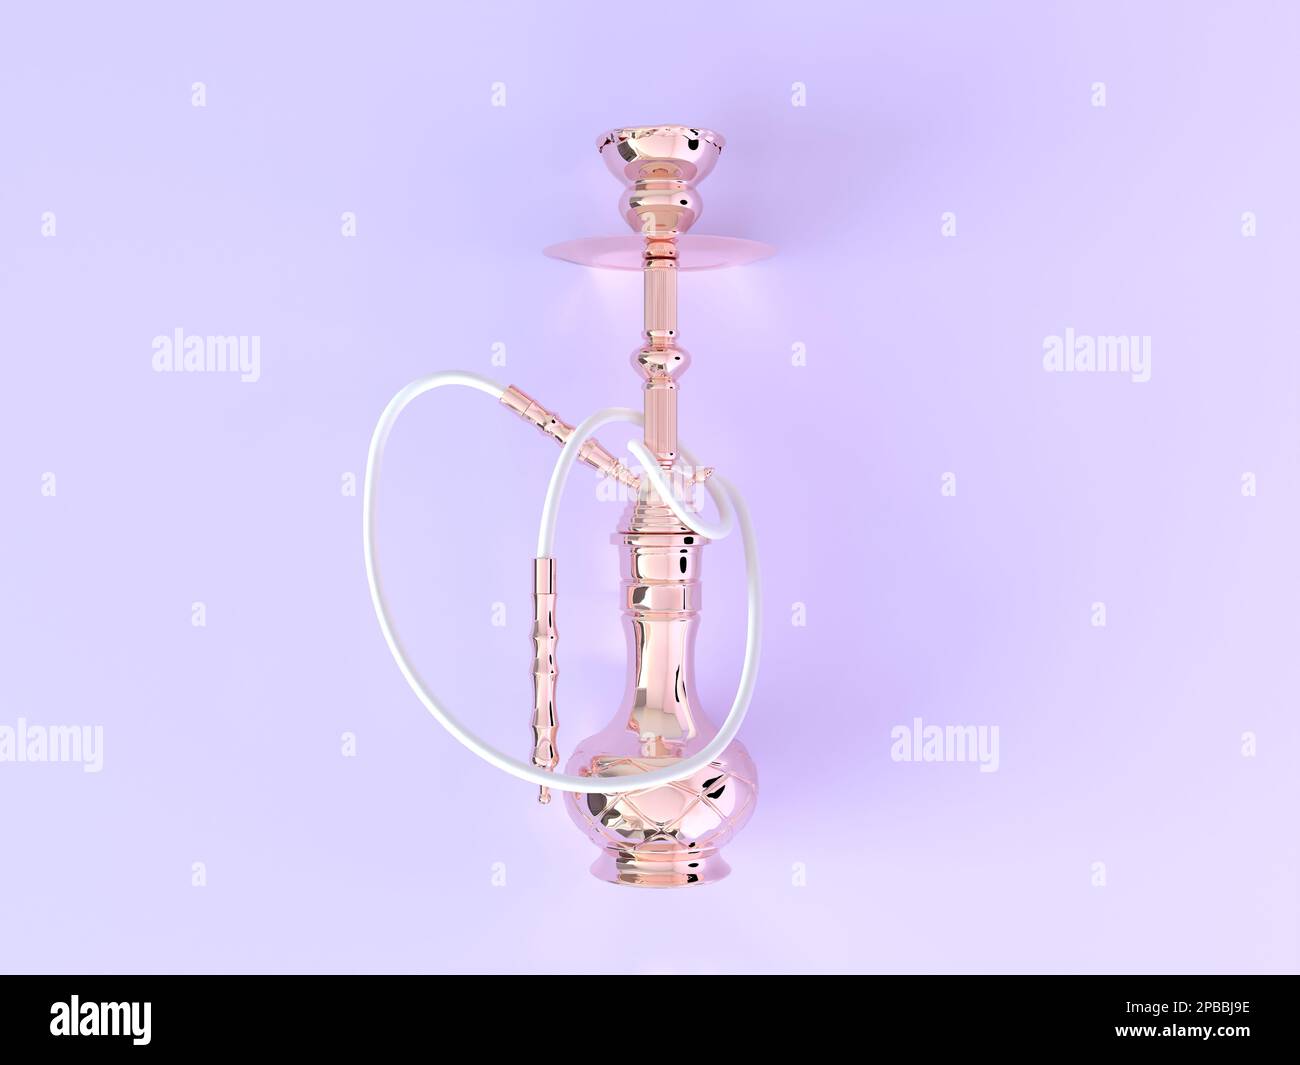 Golden hookah isolated on pastel background. Creative concept idea of hookah bar. 3d rendering illustration. Picture for banner, promotion, flyer Stock Photo